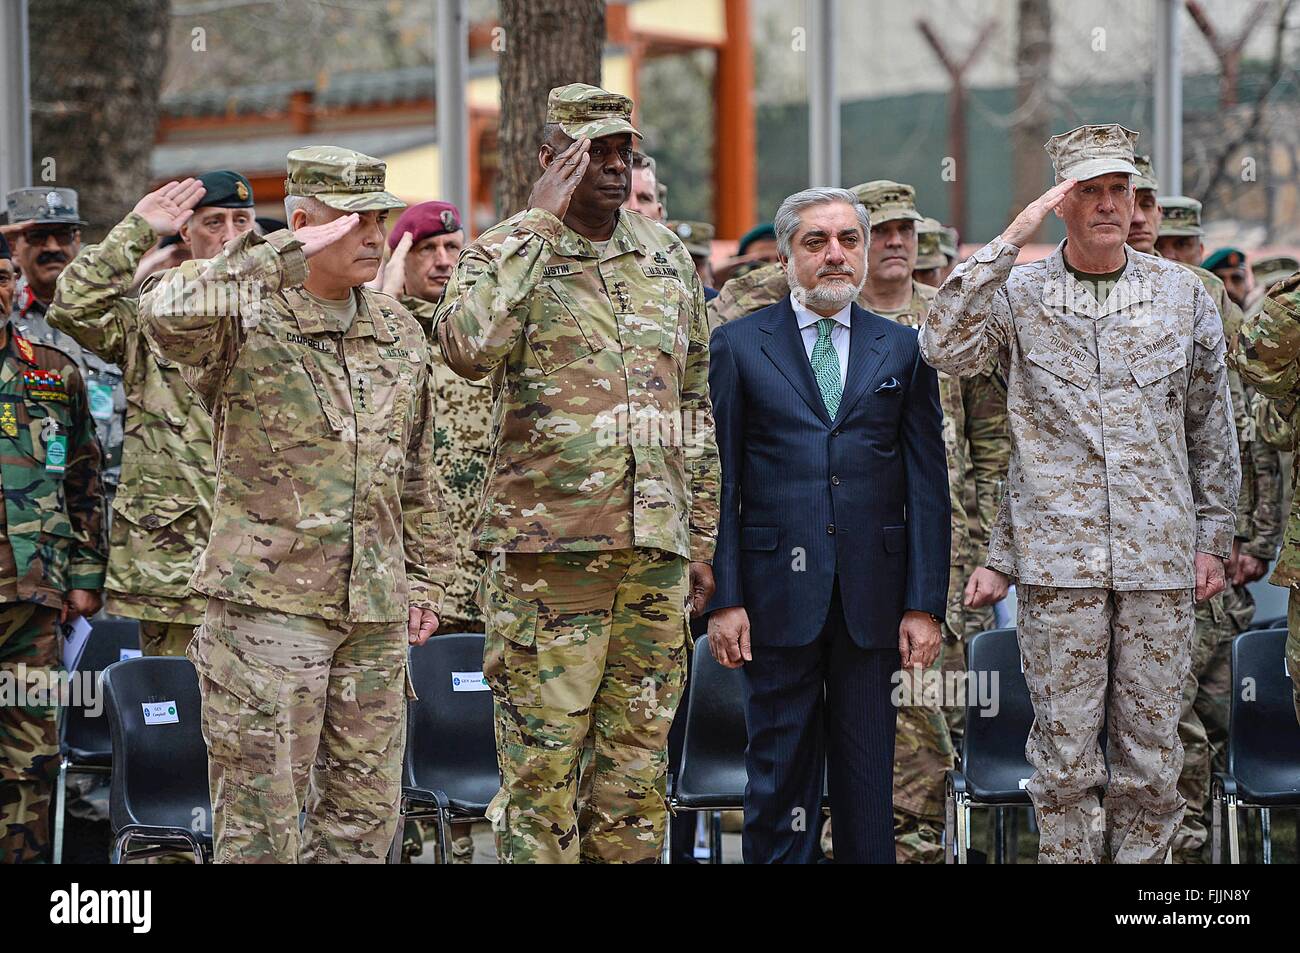 U.S Joint Chiefs Chairman General Joseph Dunford, right, salutes along with Gen. John Campbell, left, Gen. Lloyd Austin and Afghan CEO Abdullah Abdullah during the change of command ceremony March 2, 2016 in Kabul, Afghanistan. Stock Photo